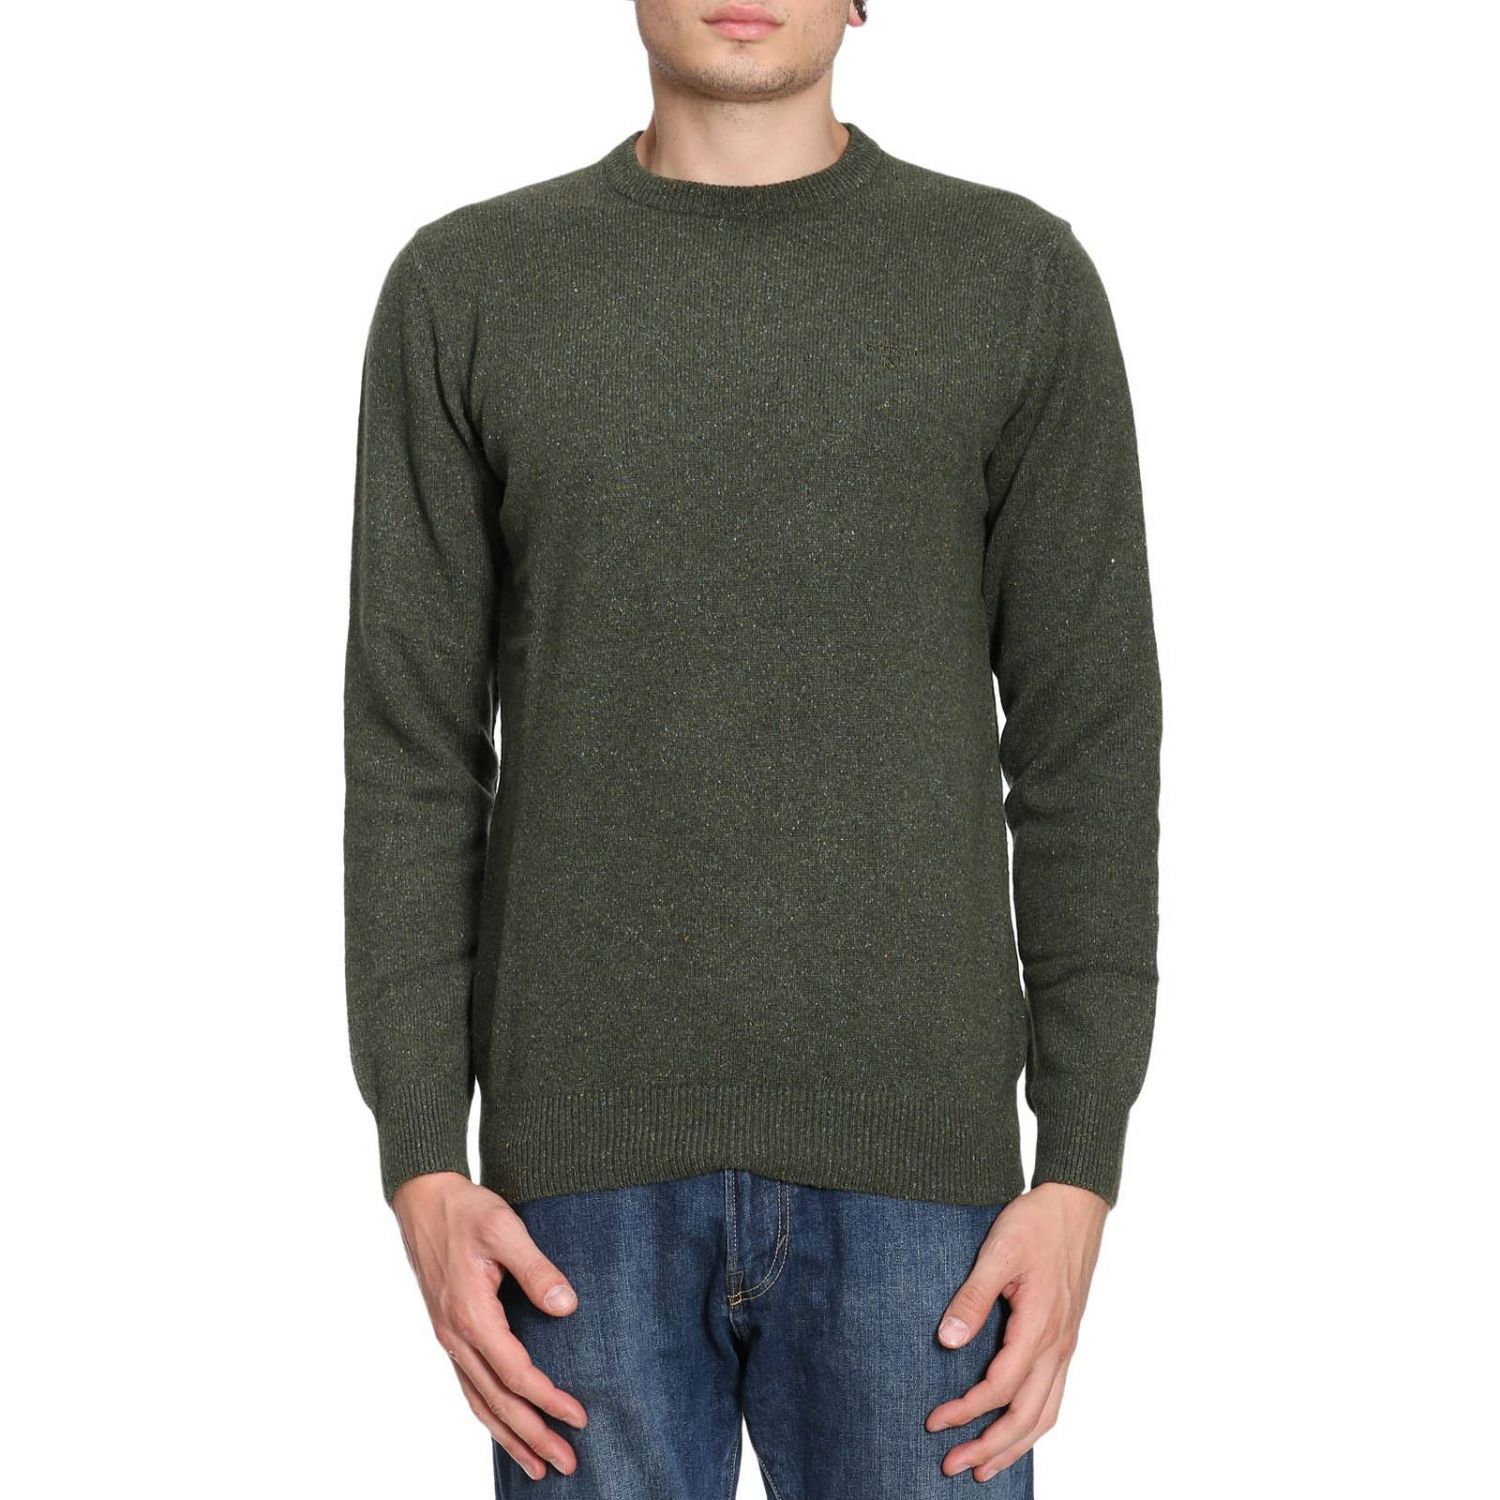 Barbour Outlet: sweater for man - Green | Barbour sweater BAMAG0479 MKN ...